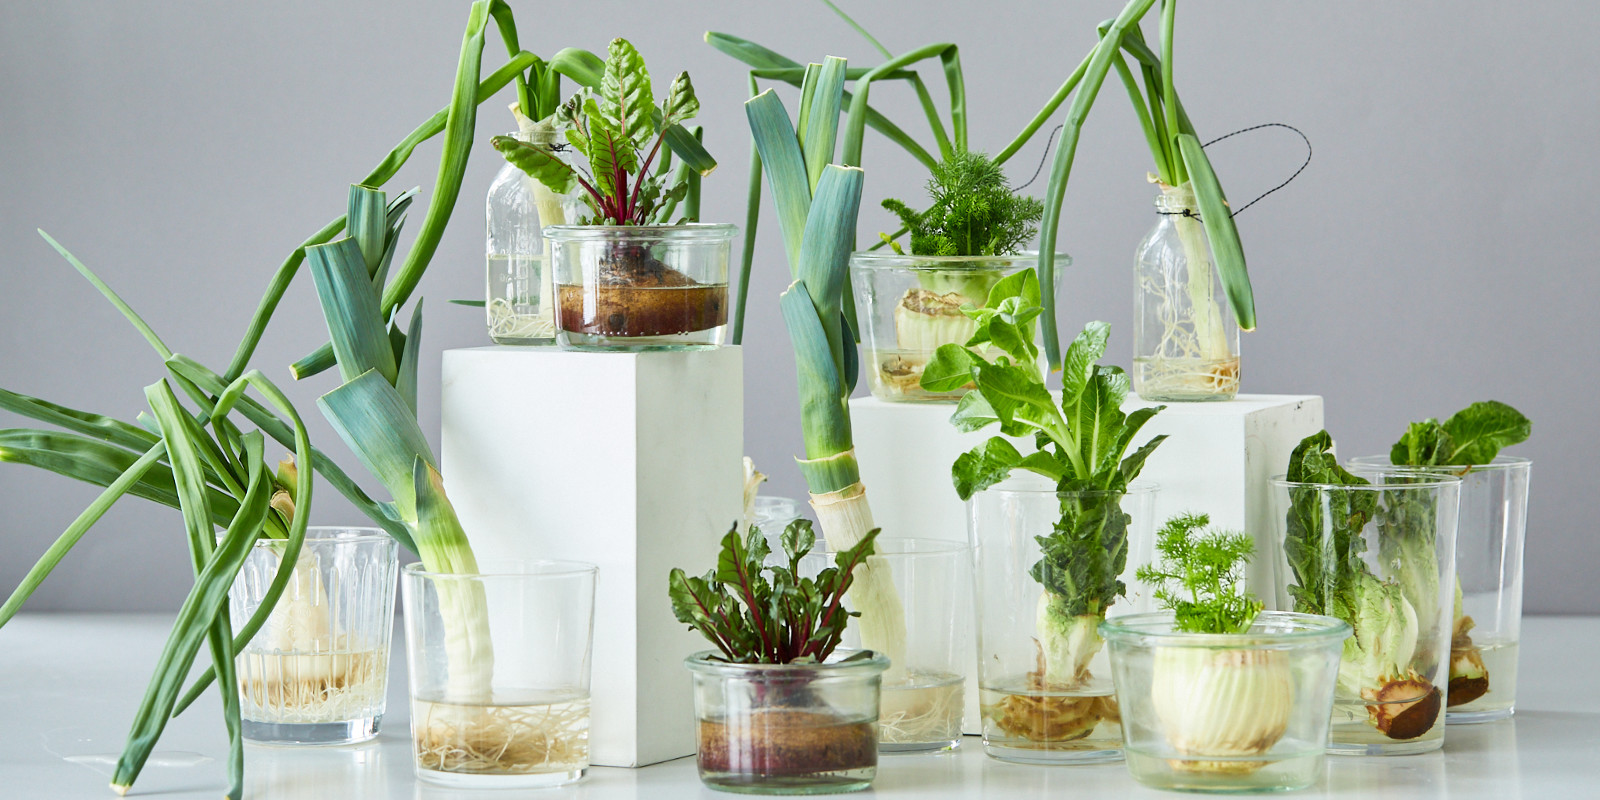 5 Valuable Vegetables You Can Regrow From Kitchen Scraps